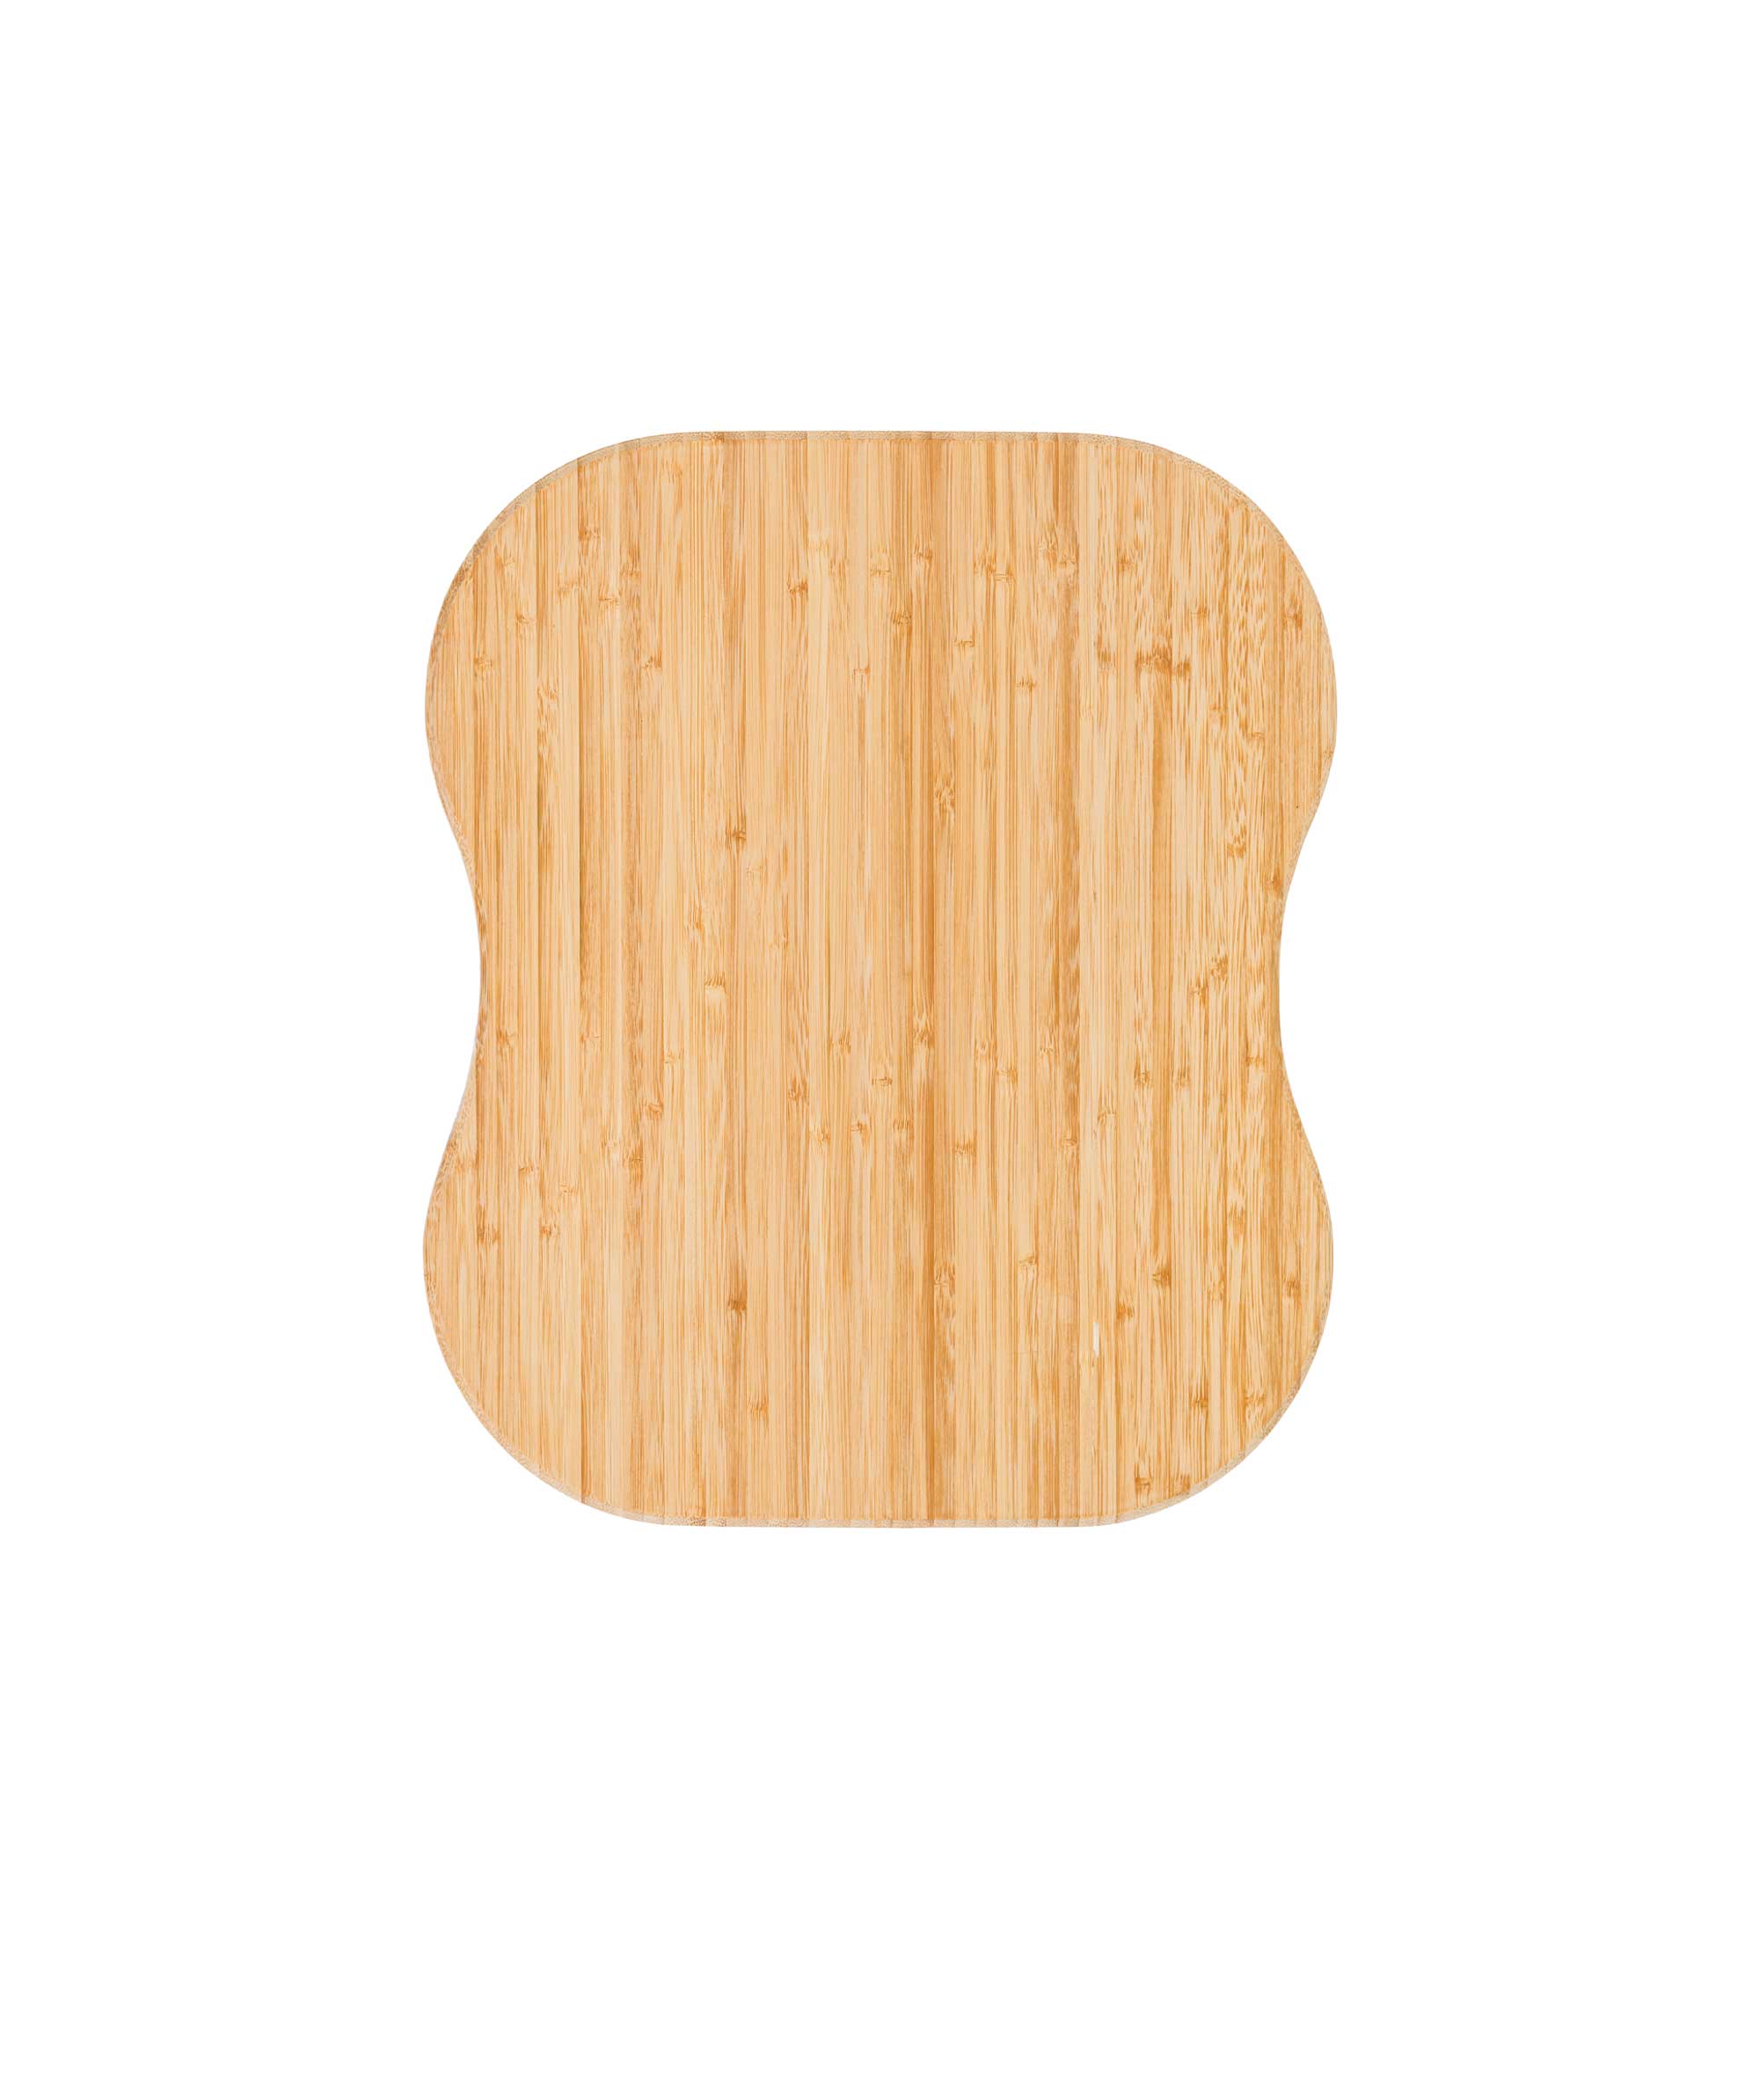 Cutting Board 01 - for Acero 800, 980, 1080 and 1200